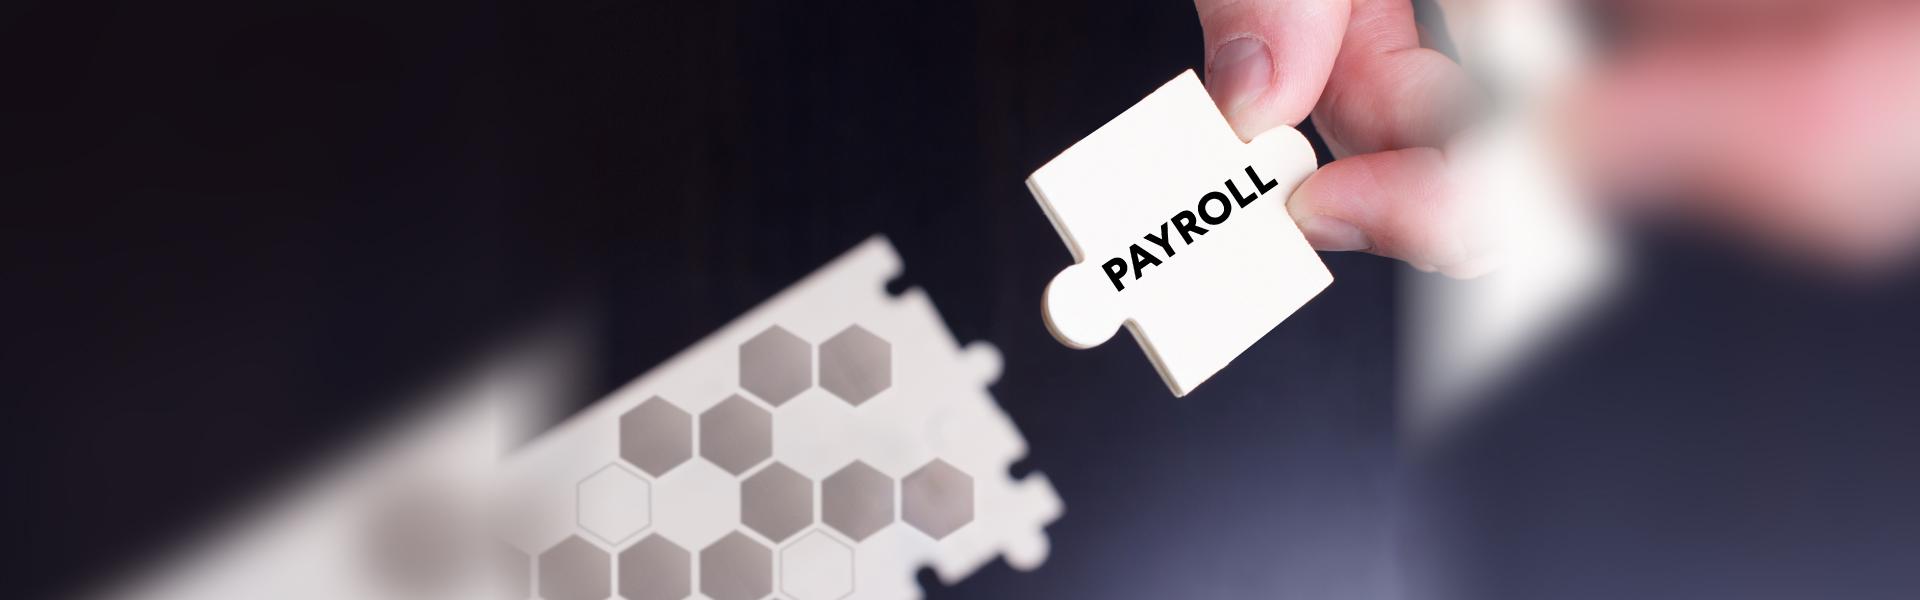 Payroll Outsourcing Partner for Your Business - Exela HR Solutions